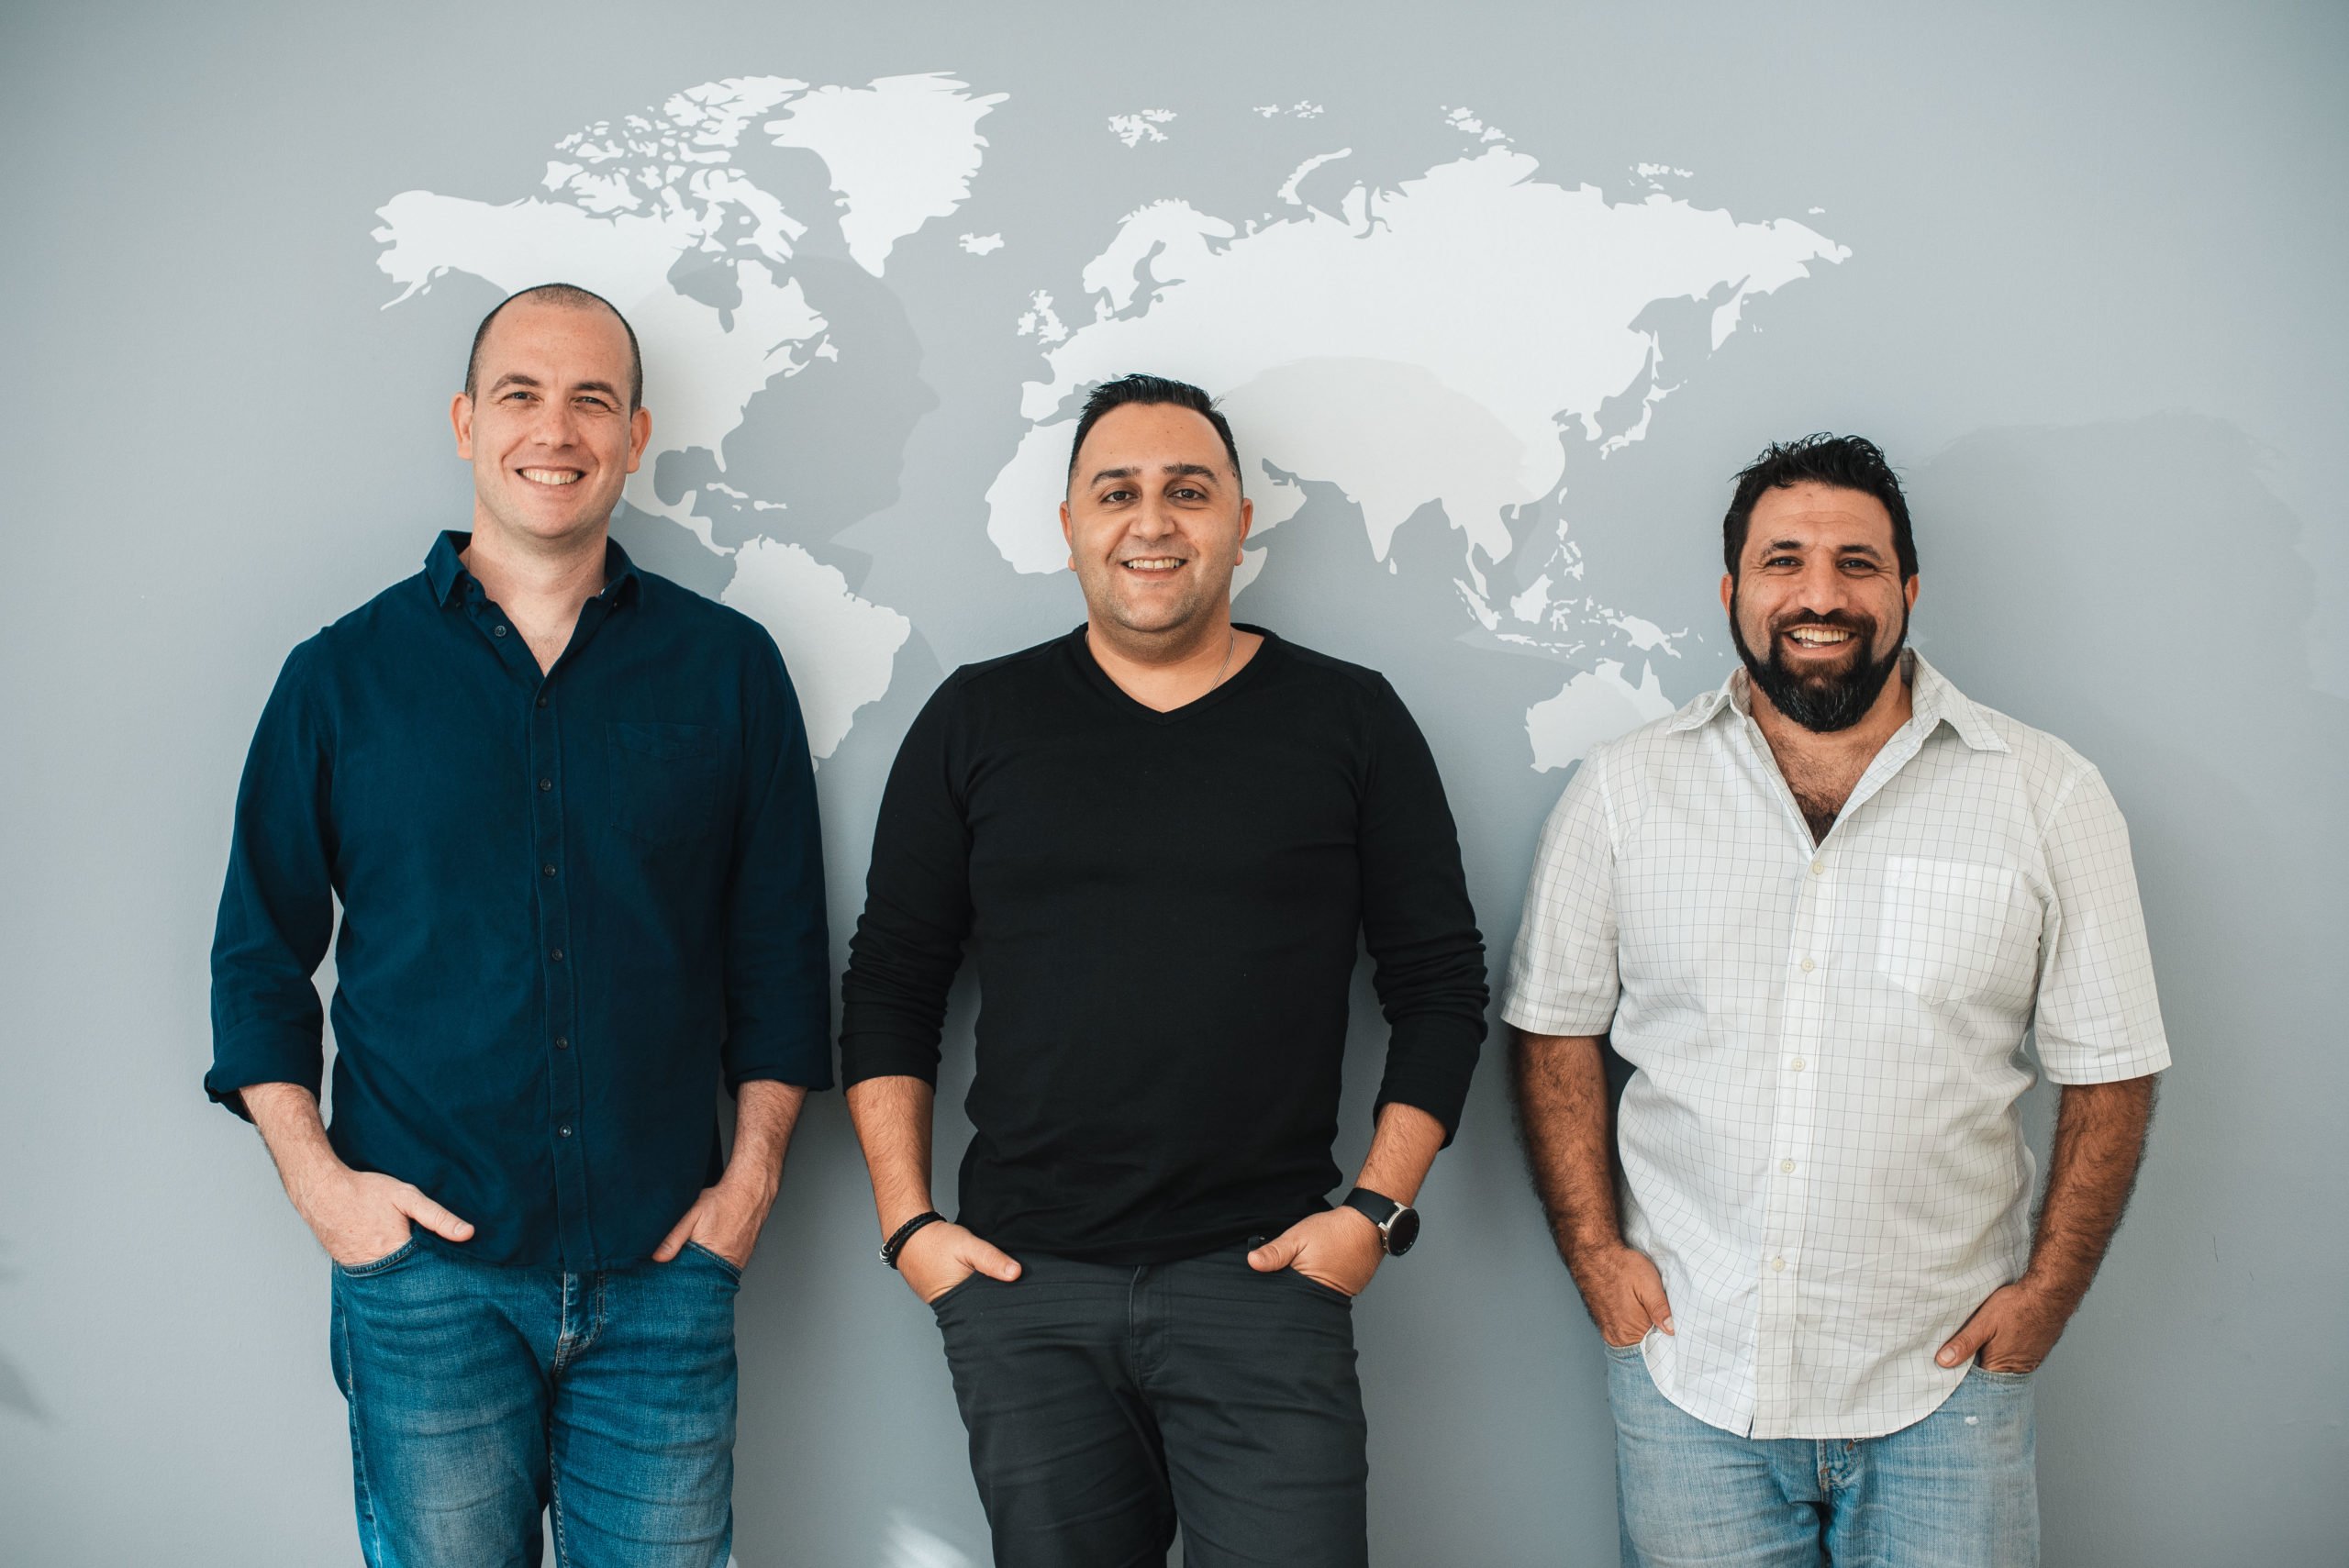 Israeli startup Dataloop launches AI data management platform with $16 million in funding